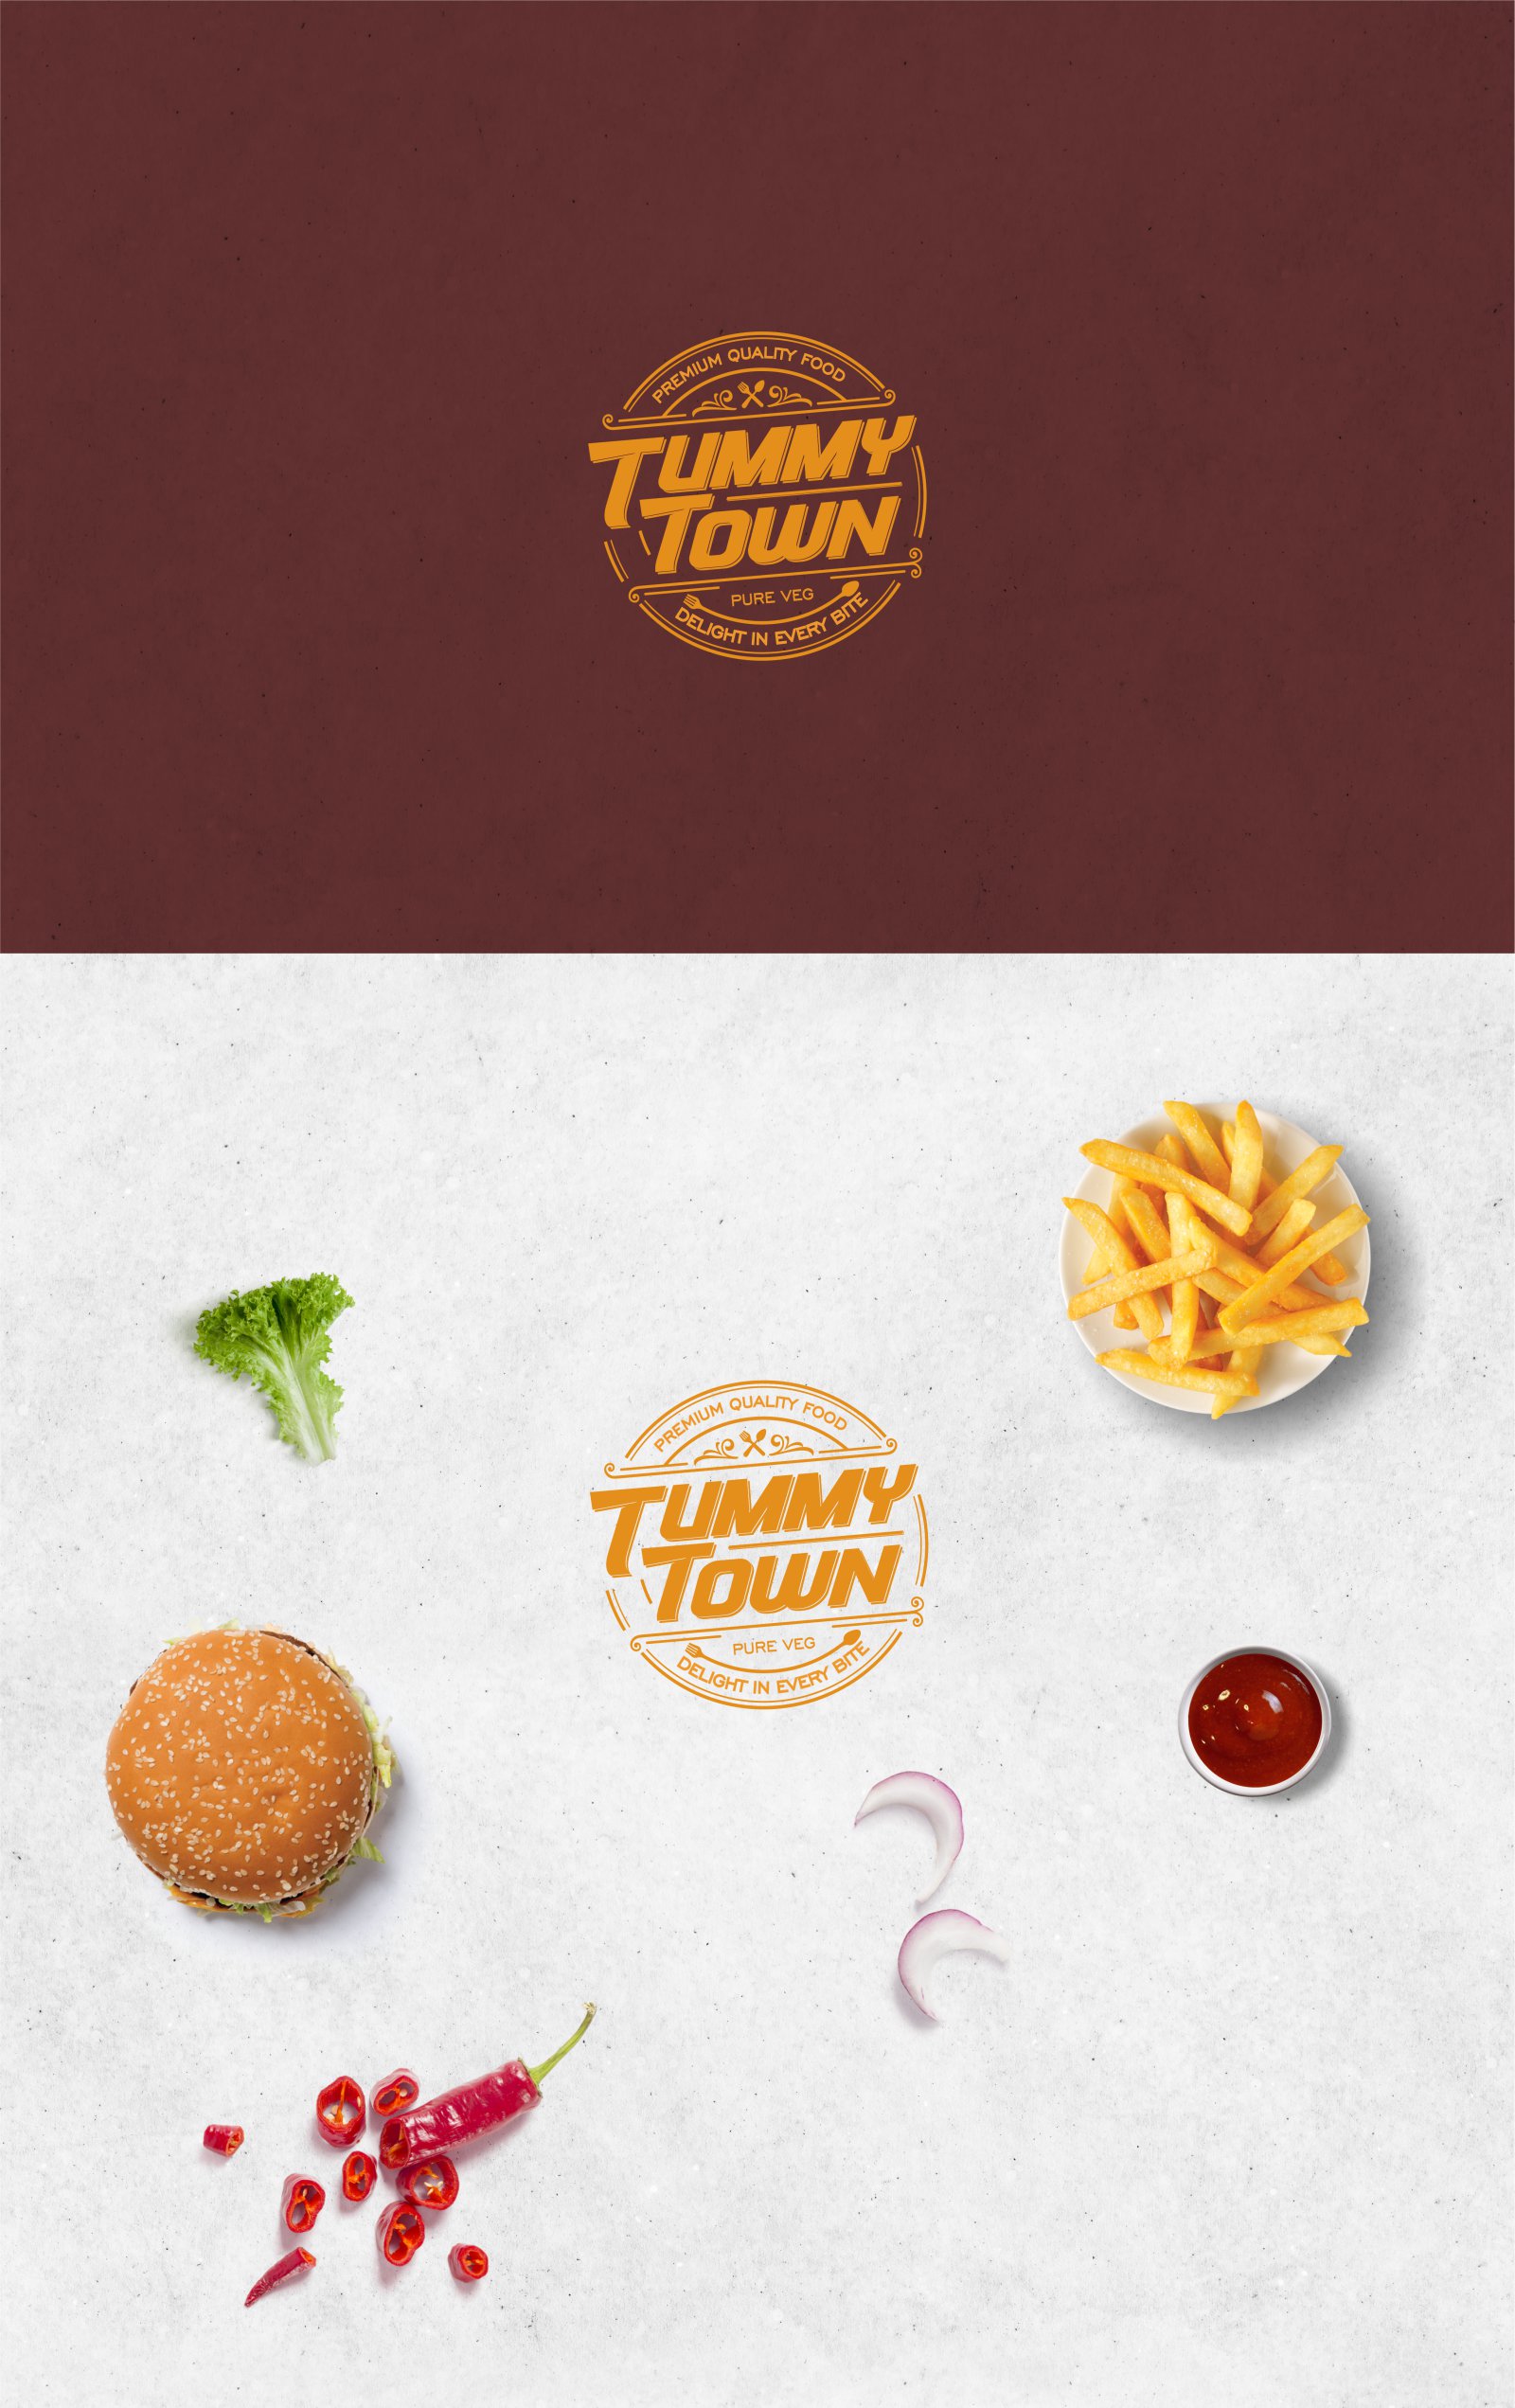 Tummy Town Branding and Packaging Design